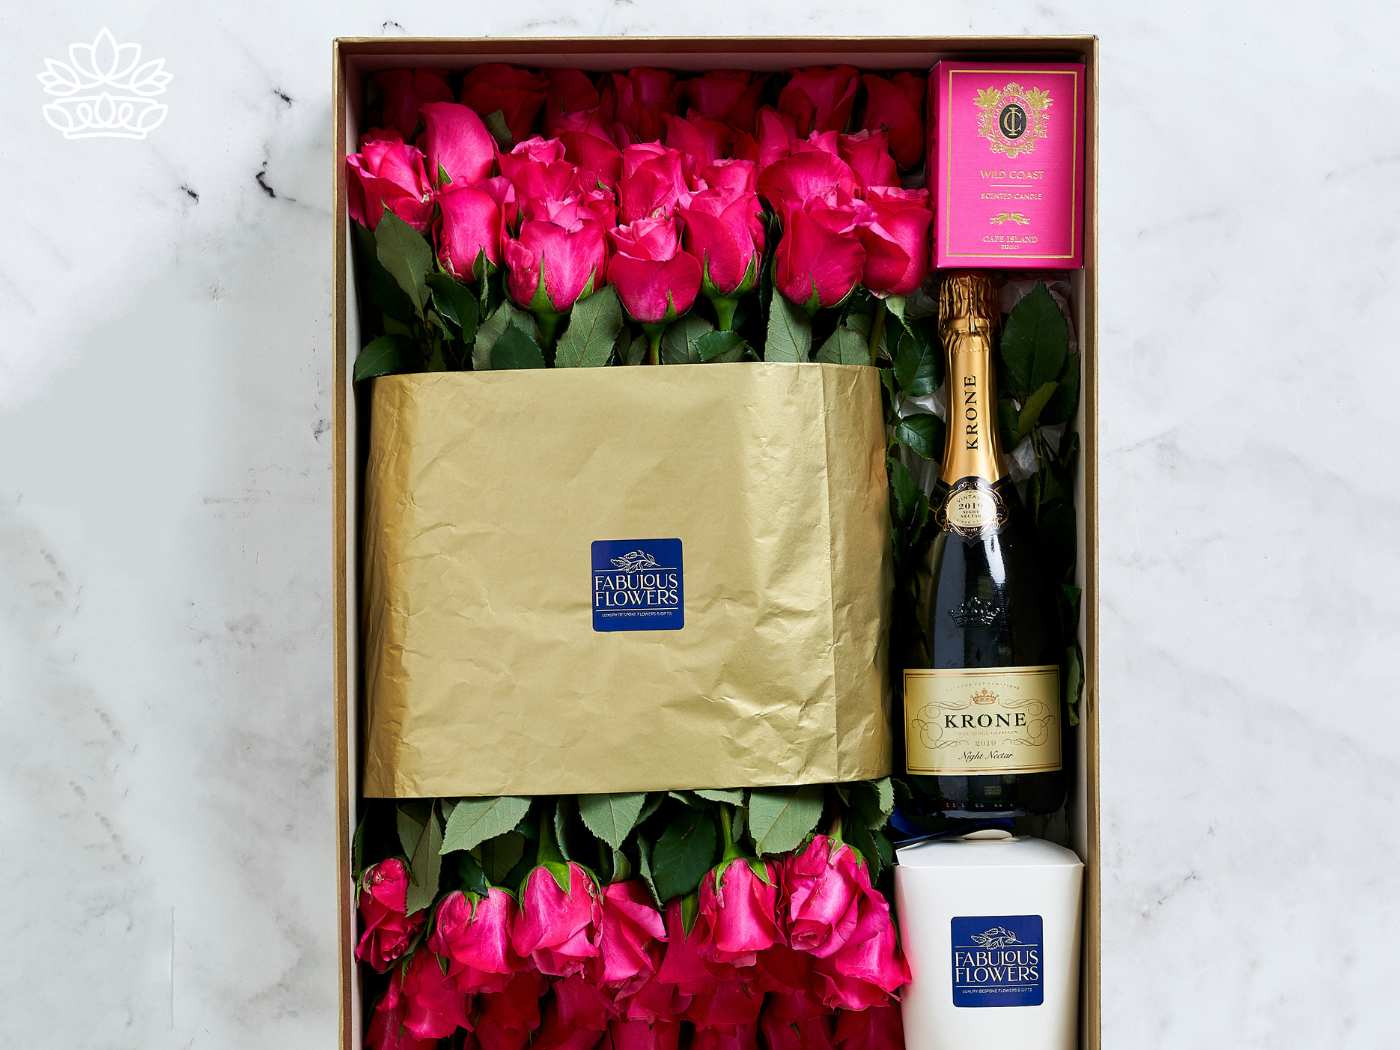 Luxurious graduation gift from Fabulous Flowers and Gifts featuring a bouquet of vibrant pink roses, a bottle of Krone sparkling wine, and a Wild Coast fragrance candle, thoughtfully packaged and ready to be delivered with heart